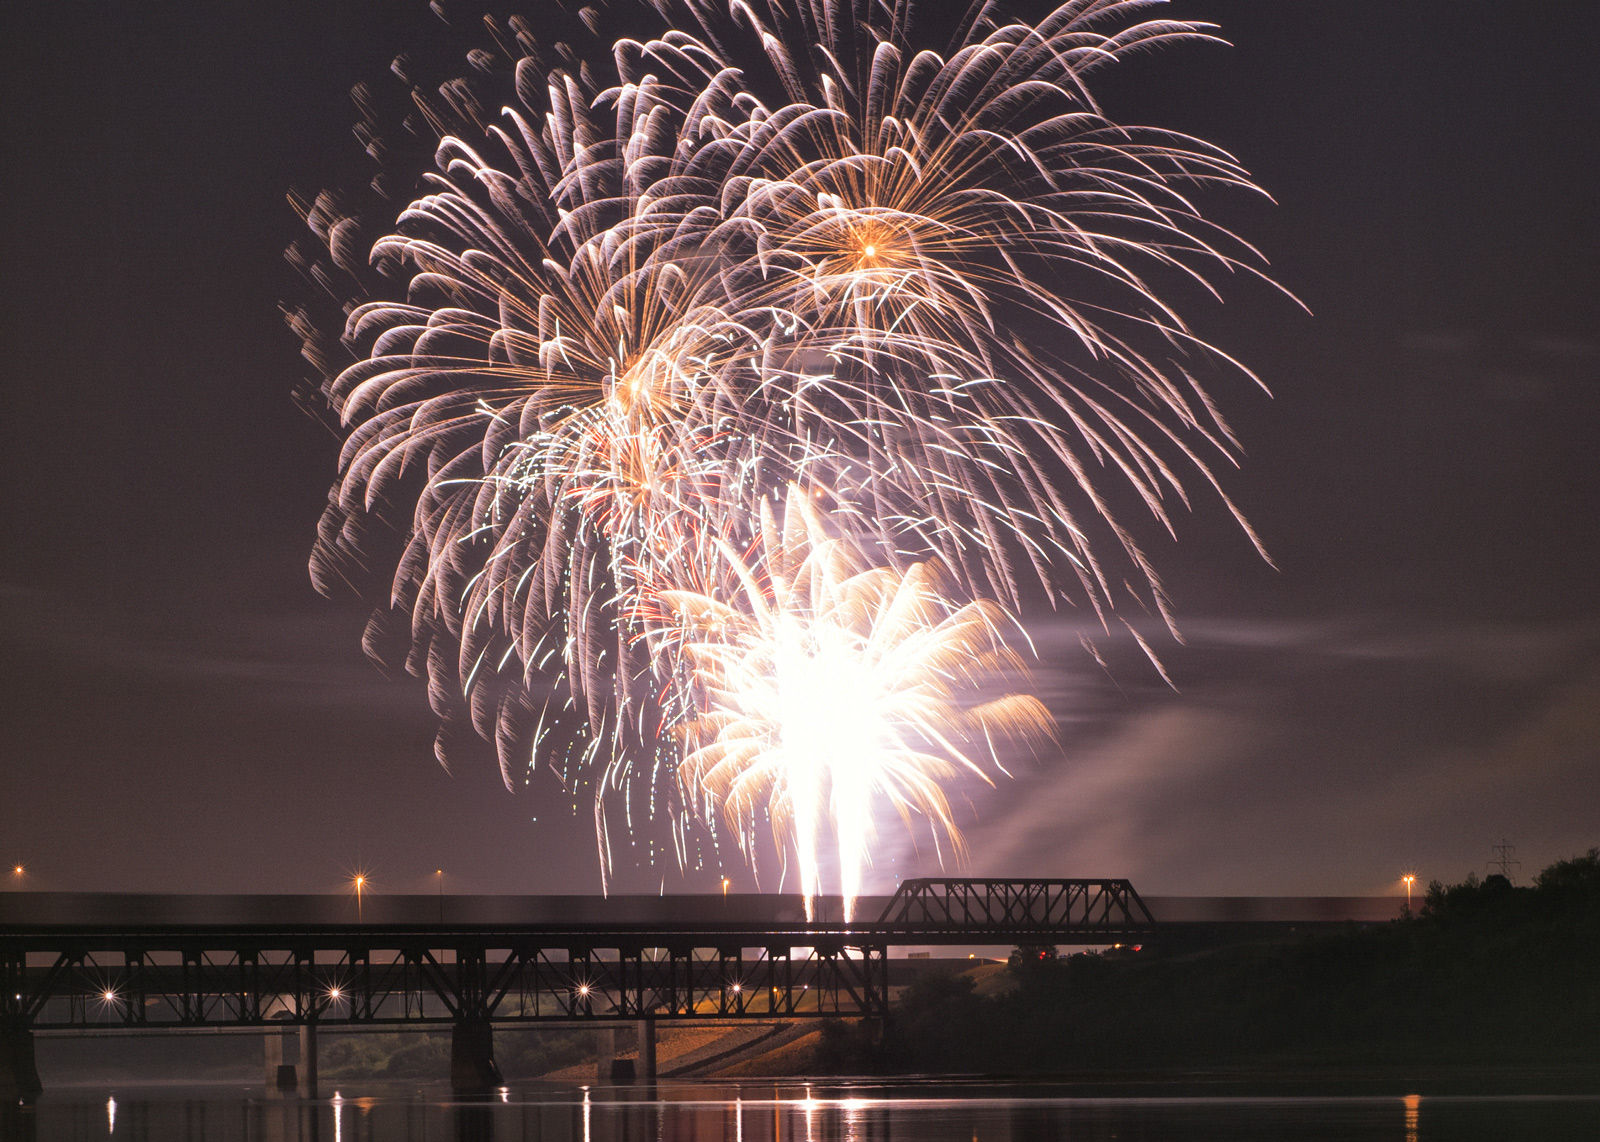 Catch the fireworks over the South Saskatchewan River on Canada Day, one of the most popular tourism Saskatoon events.